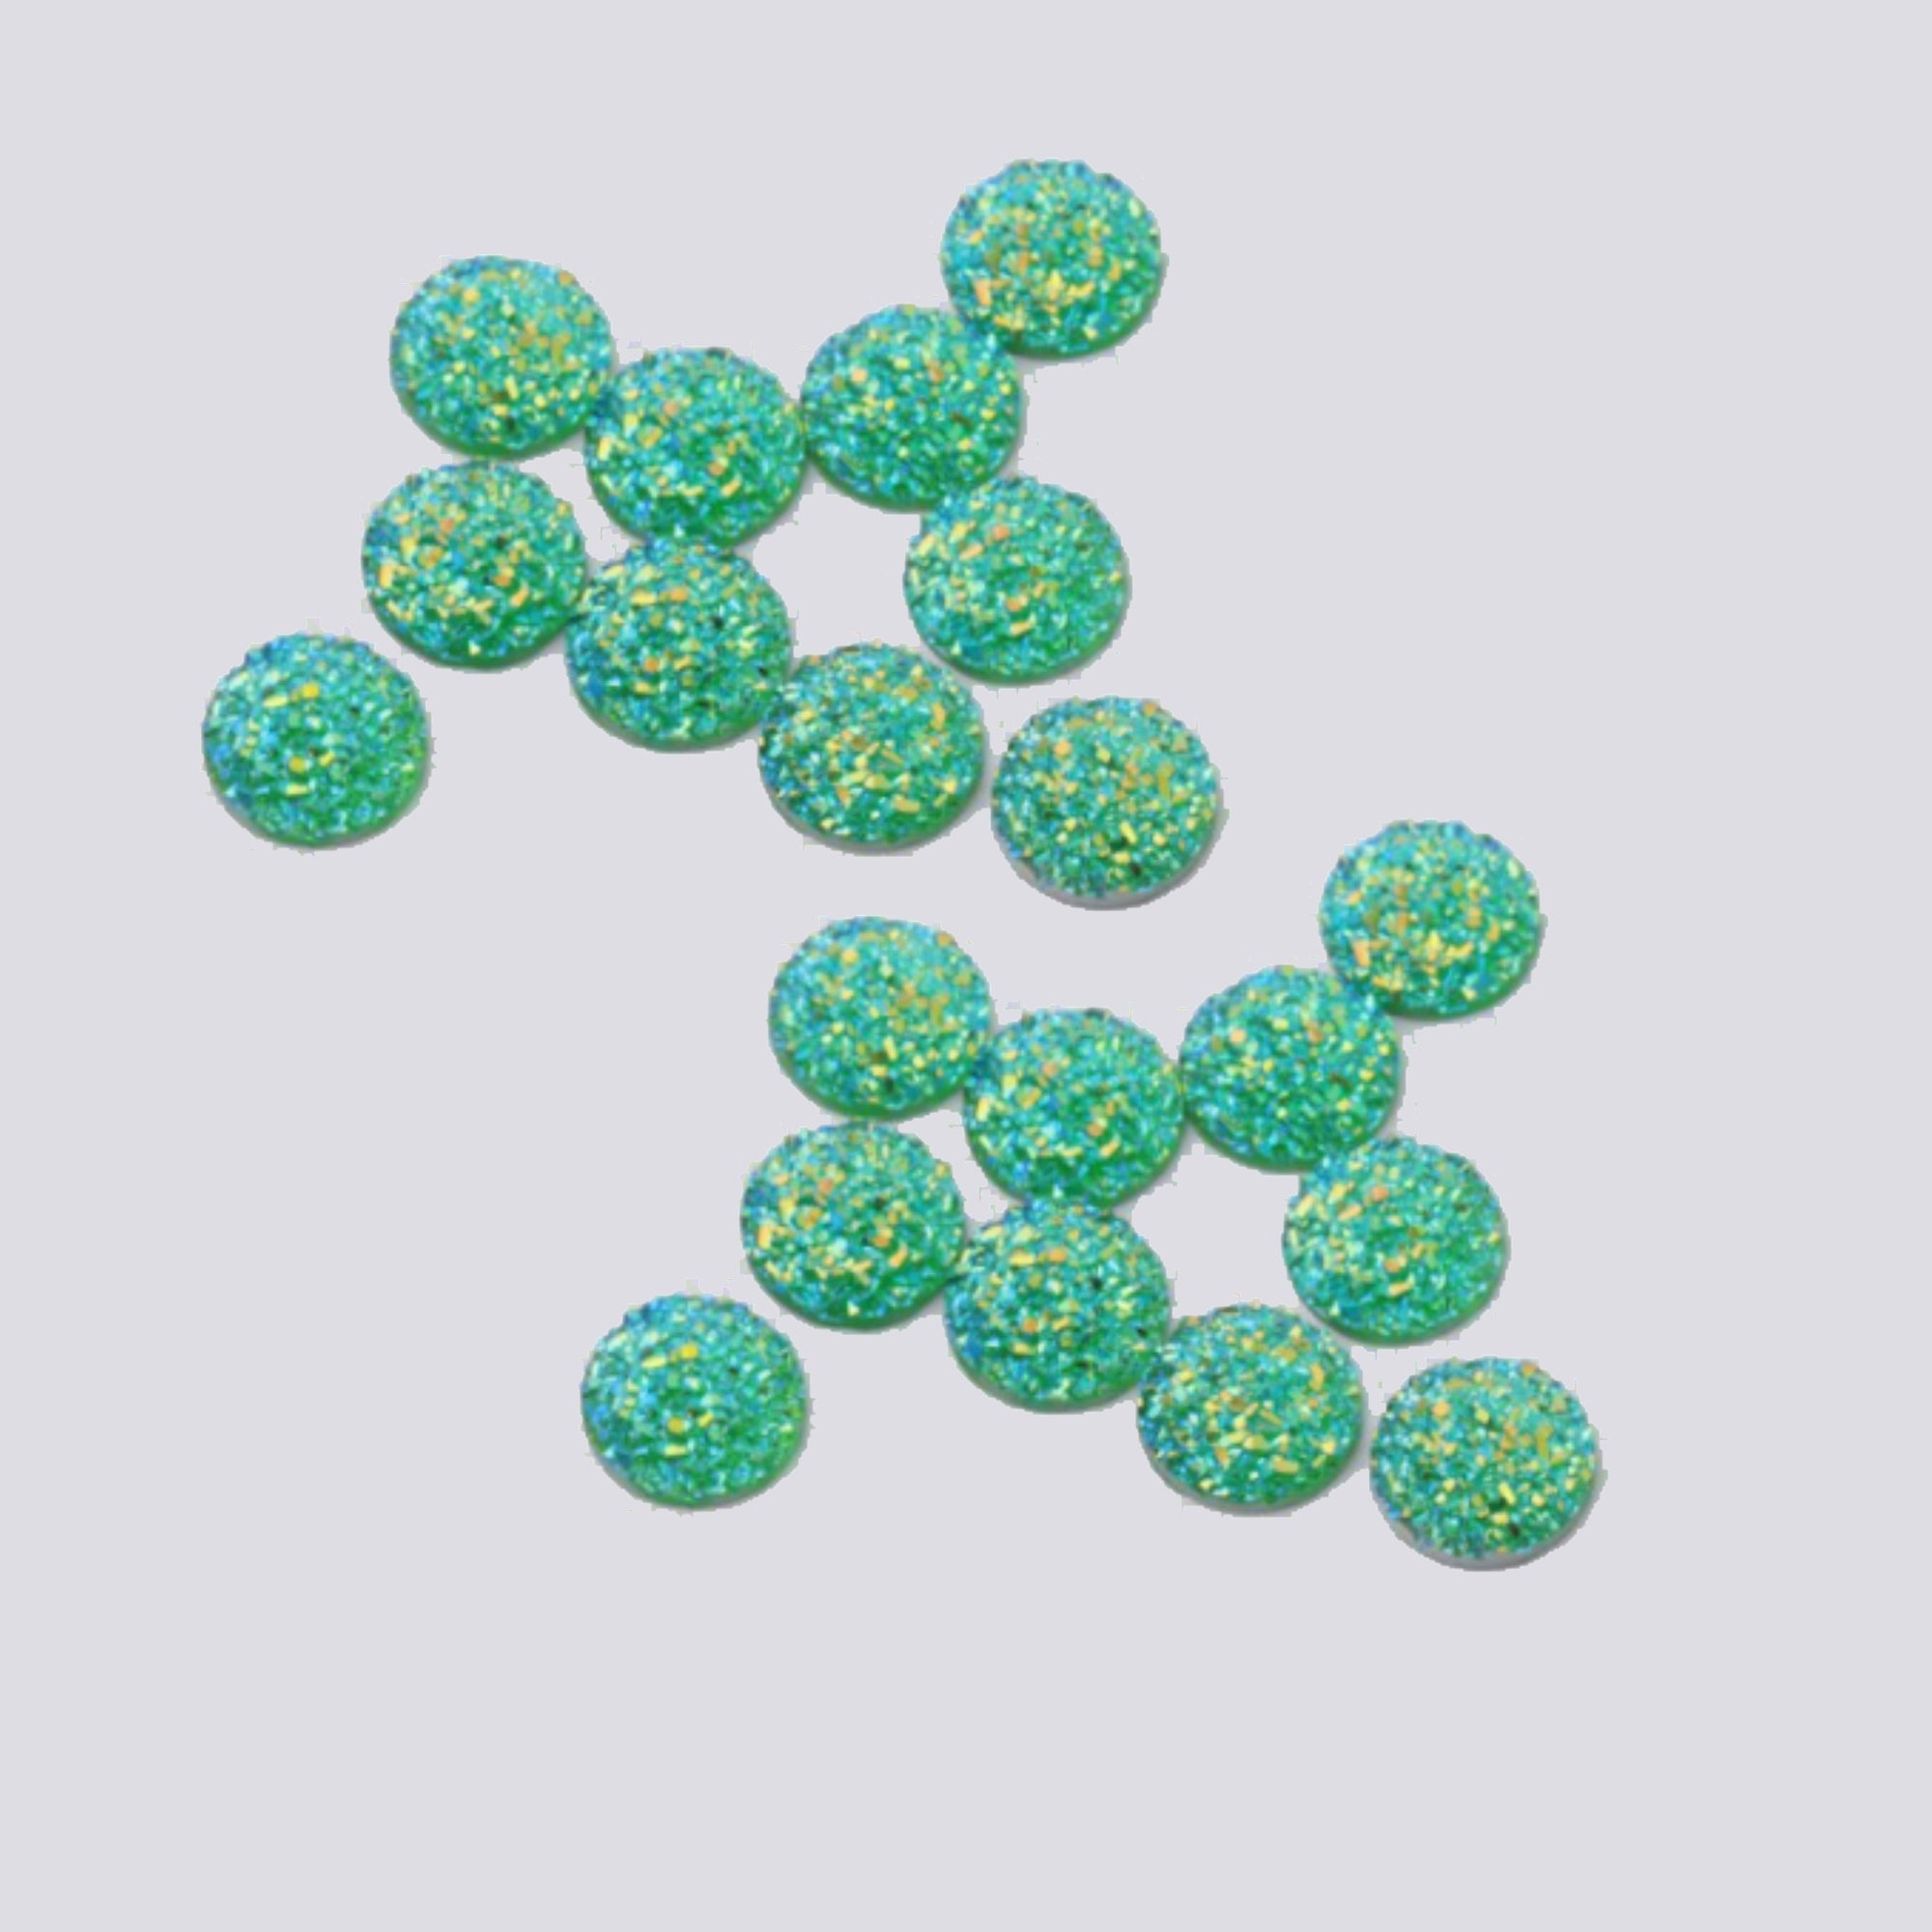 Bling It Up Collection 3/8" Blue Green Chunky Round Bling - Pkg. of 20